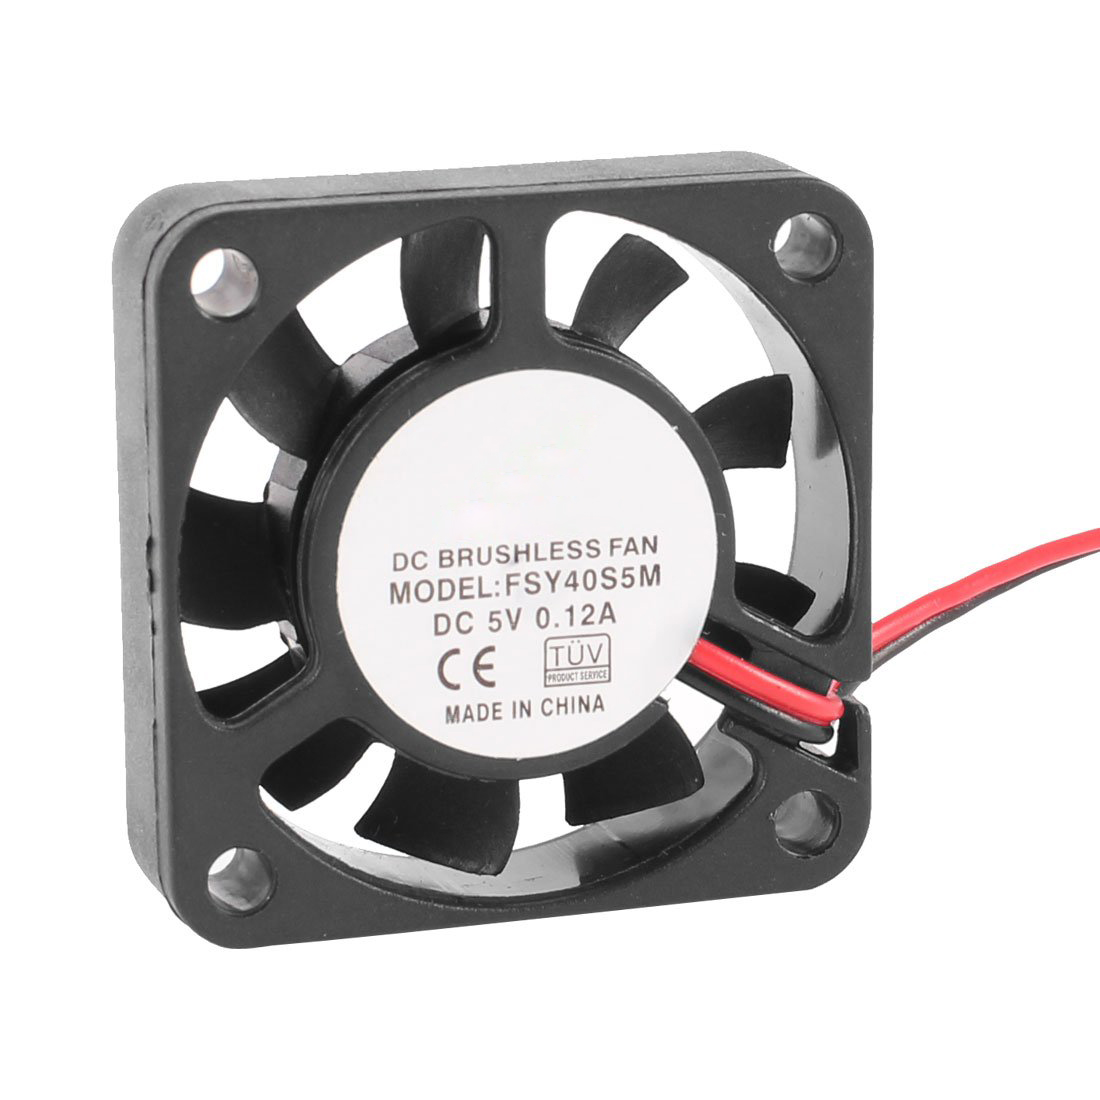 PC Brushless DC Cooling Fan 4 Pin Connector 7 Blades 12V 12cm 120mm